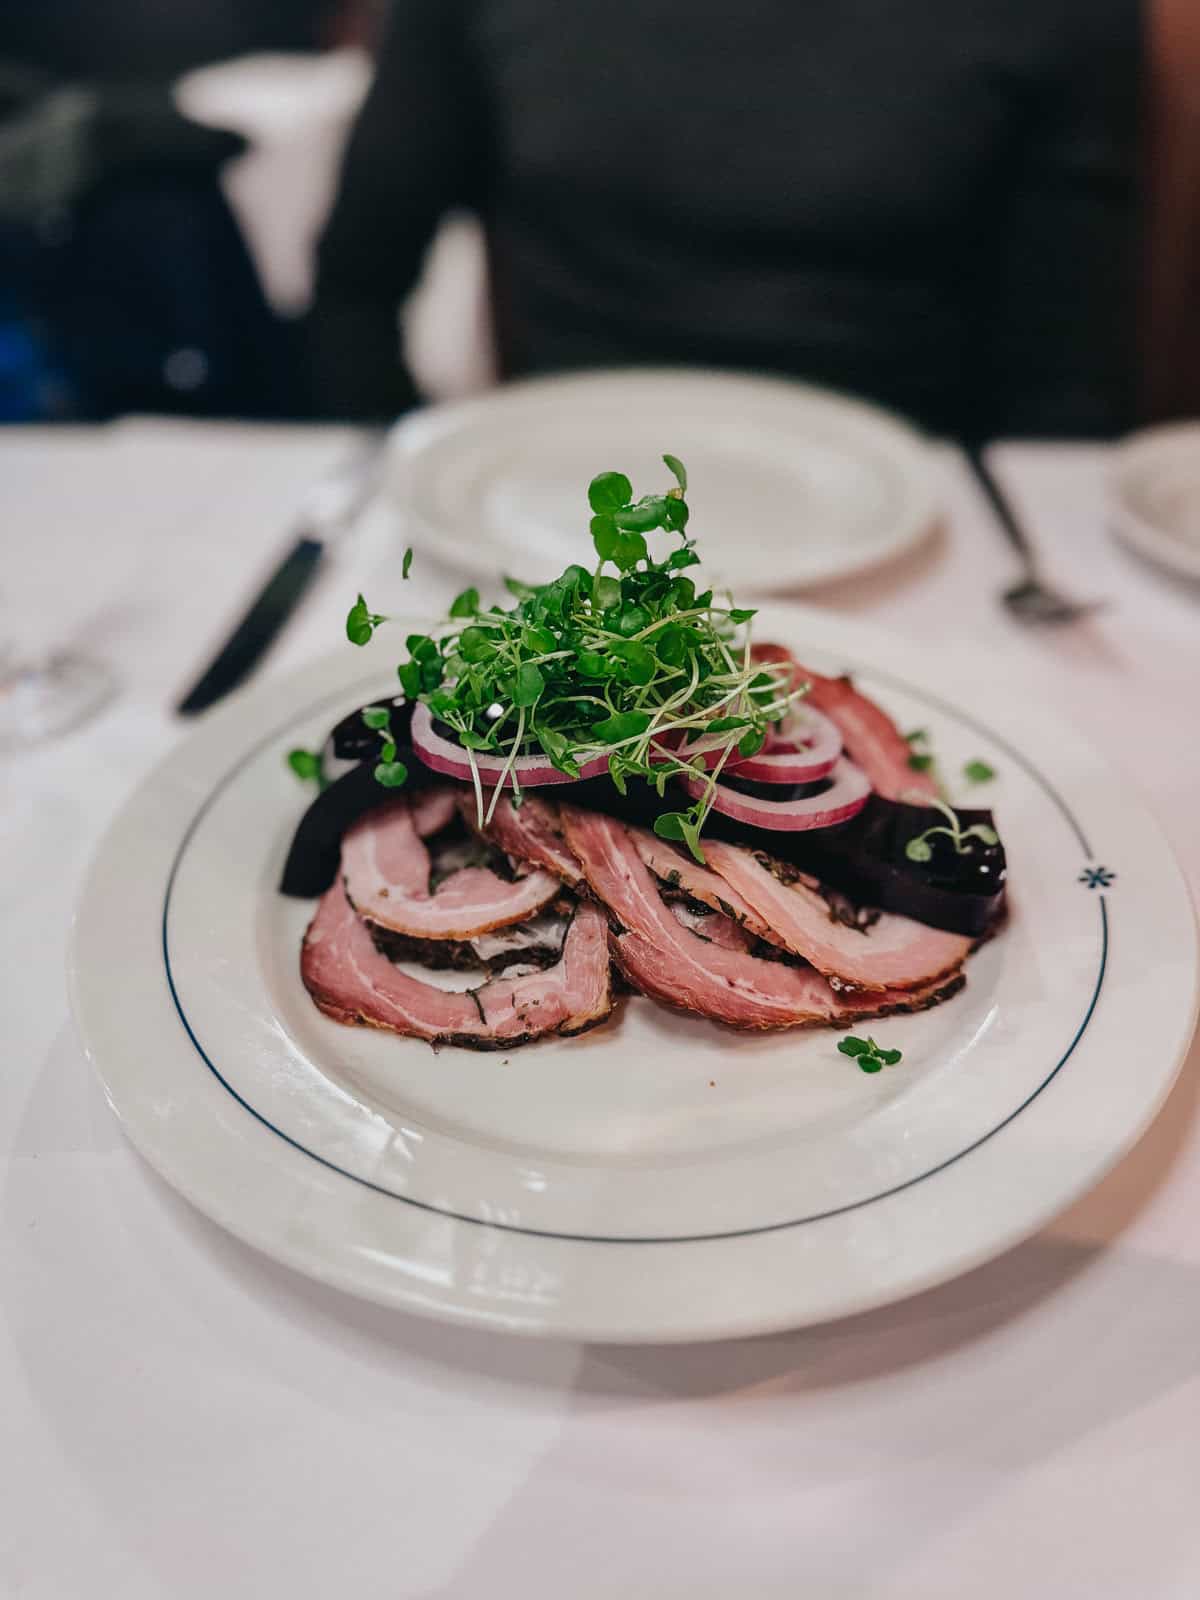 A well-presented plate of sliced roast duck garnished with green microgreens and red onion rings, served on a white plate with a blue-rimmed border in an elegant restaurant setting.